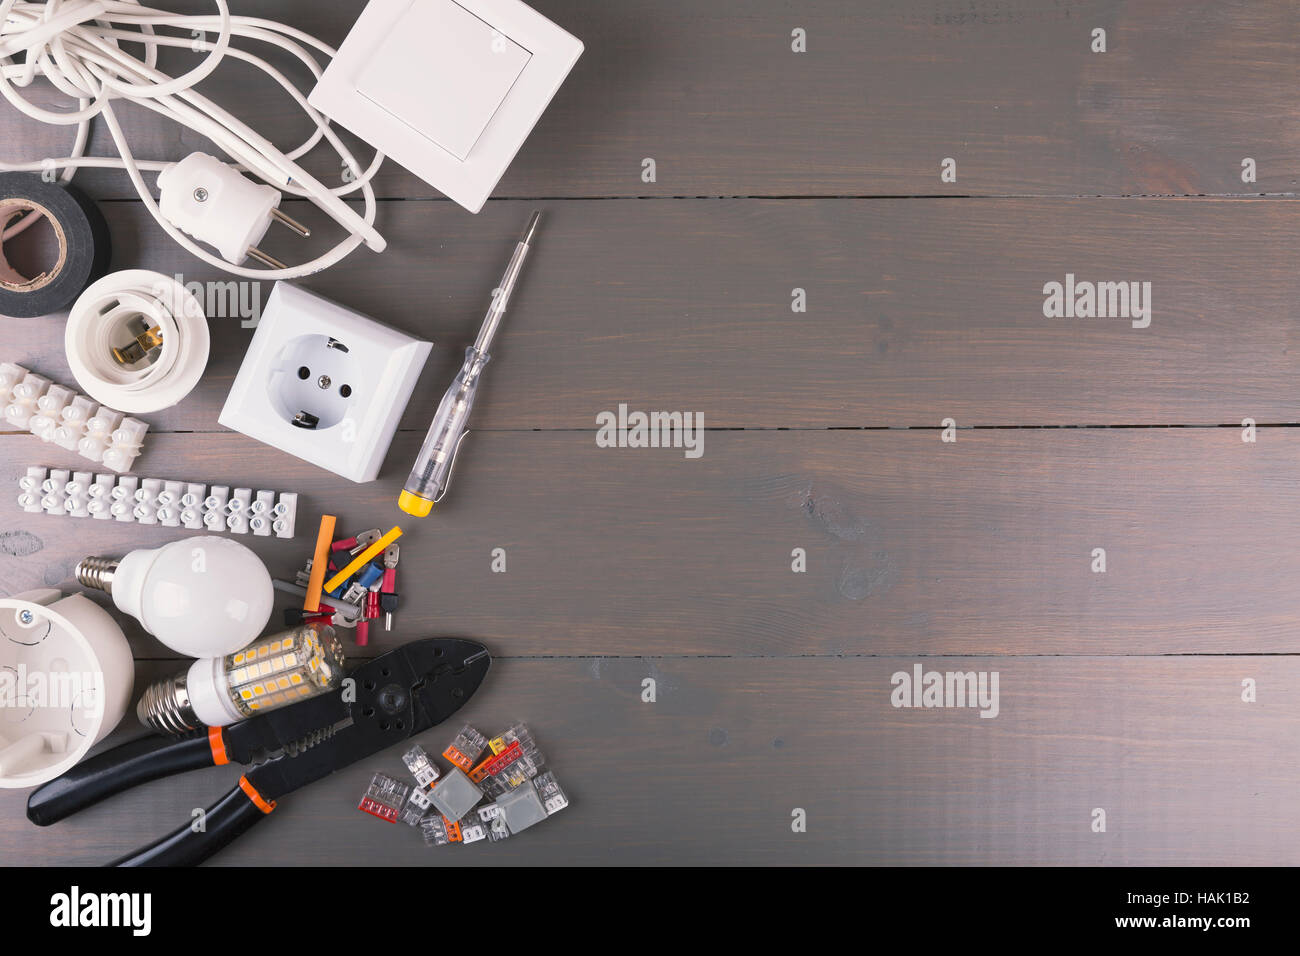 electrical tools and equipment on wooden table with copy space Stock Photo